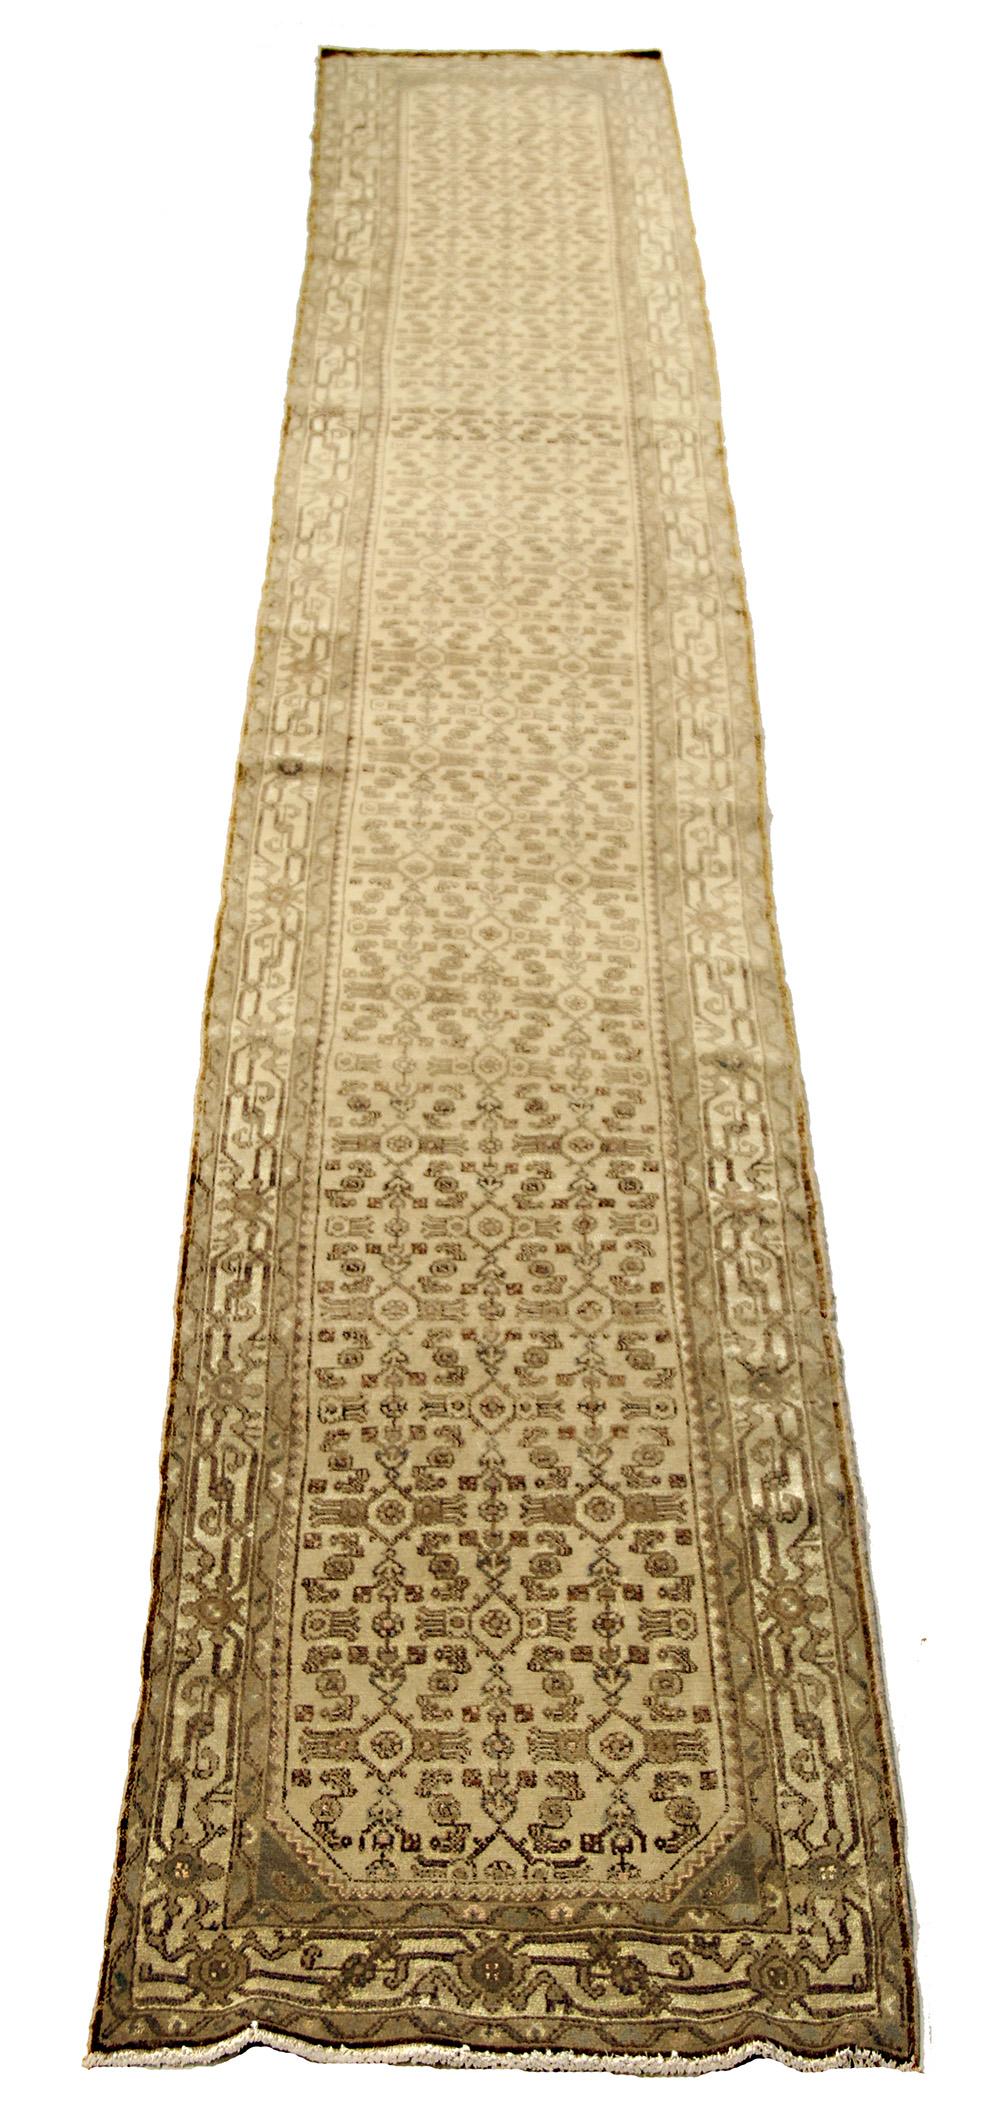 Antique Persian runner rug handwoven from the finest sheep’s wool and colored with all-natural vegetable dyes that are safe for humans and pets. It’s a traditional Malayer design featuring black geometric details over an ivory field. It’s a lovely